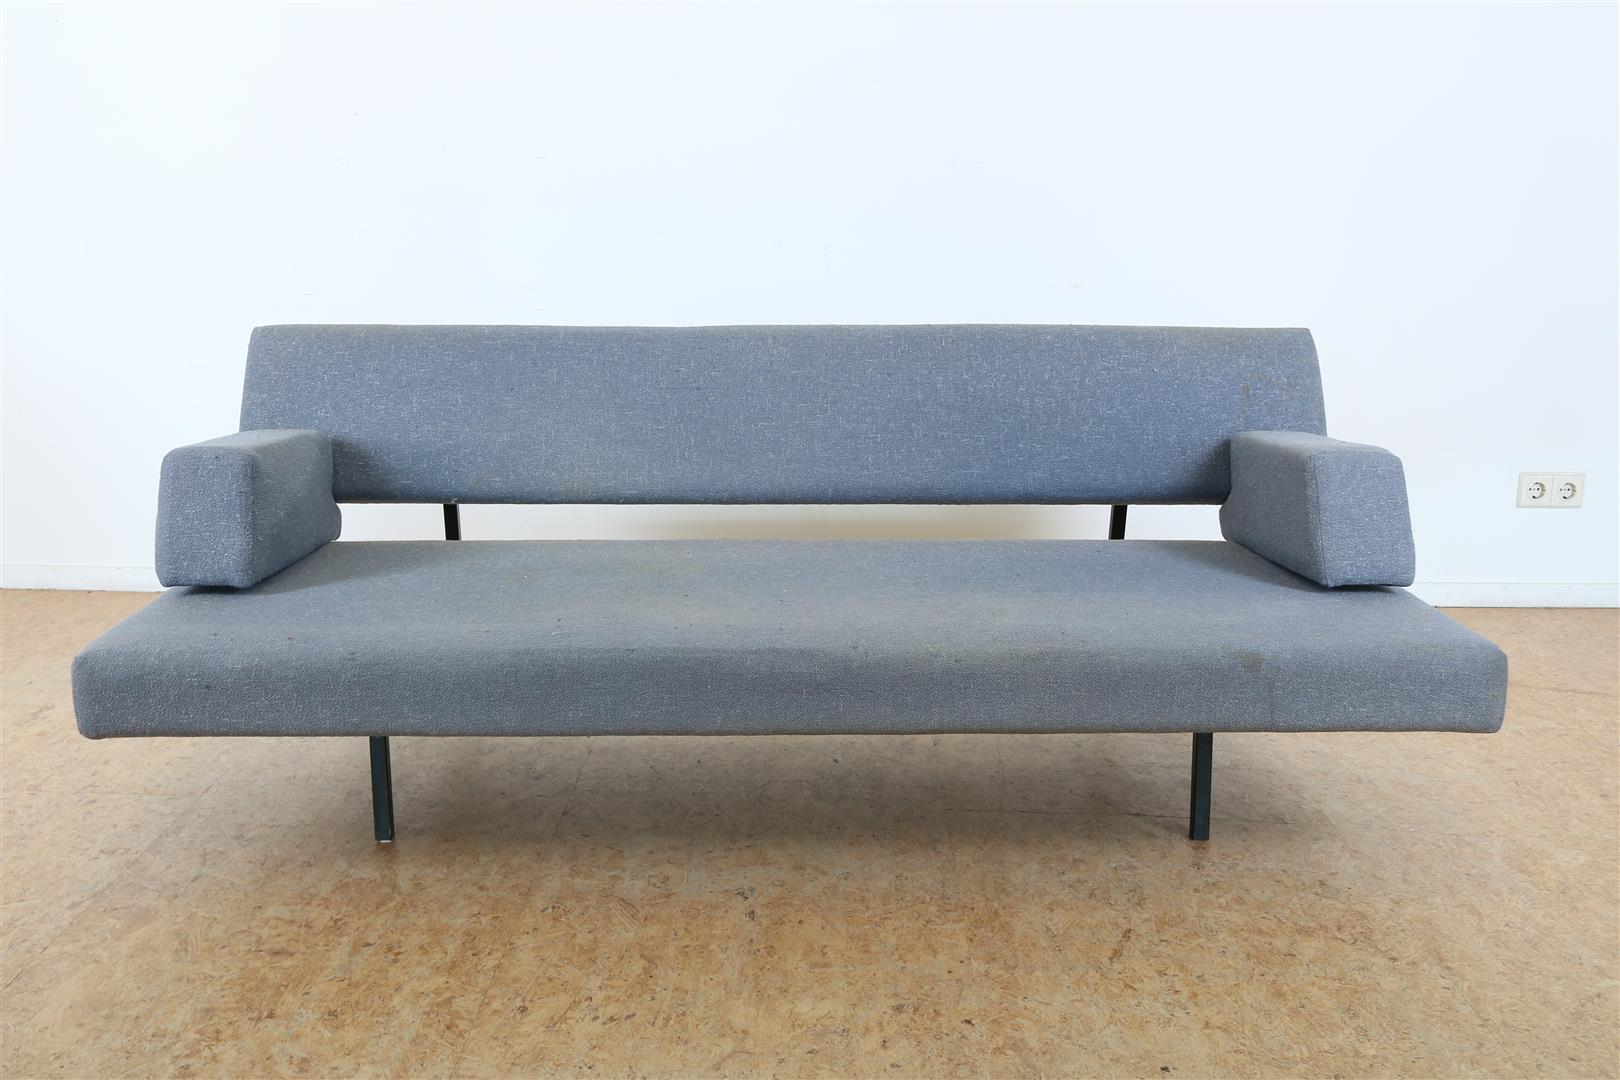 Designer sofa bed with gray wool upholstery and 2 loose cushions on a black base, Martin Visser, - Image 3 of 8